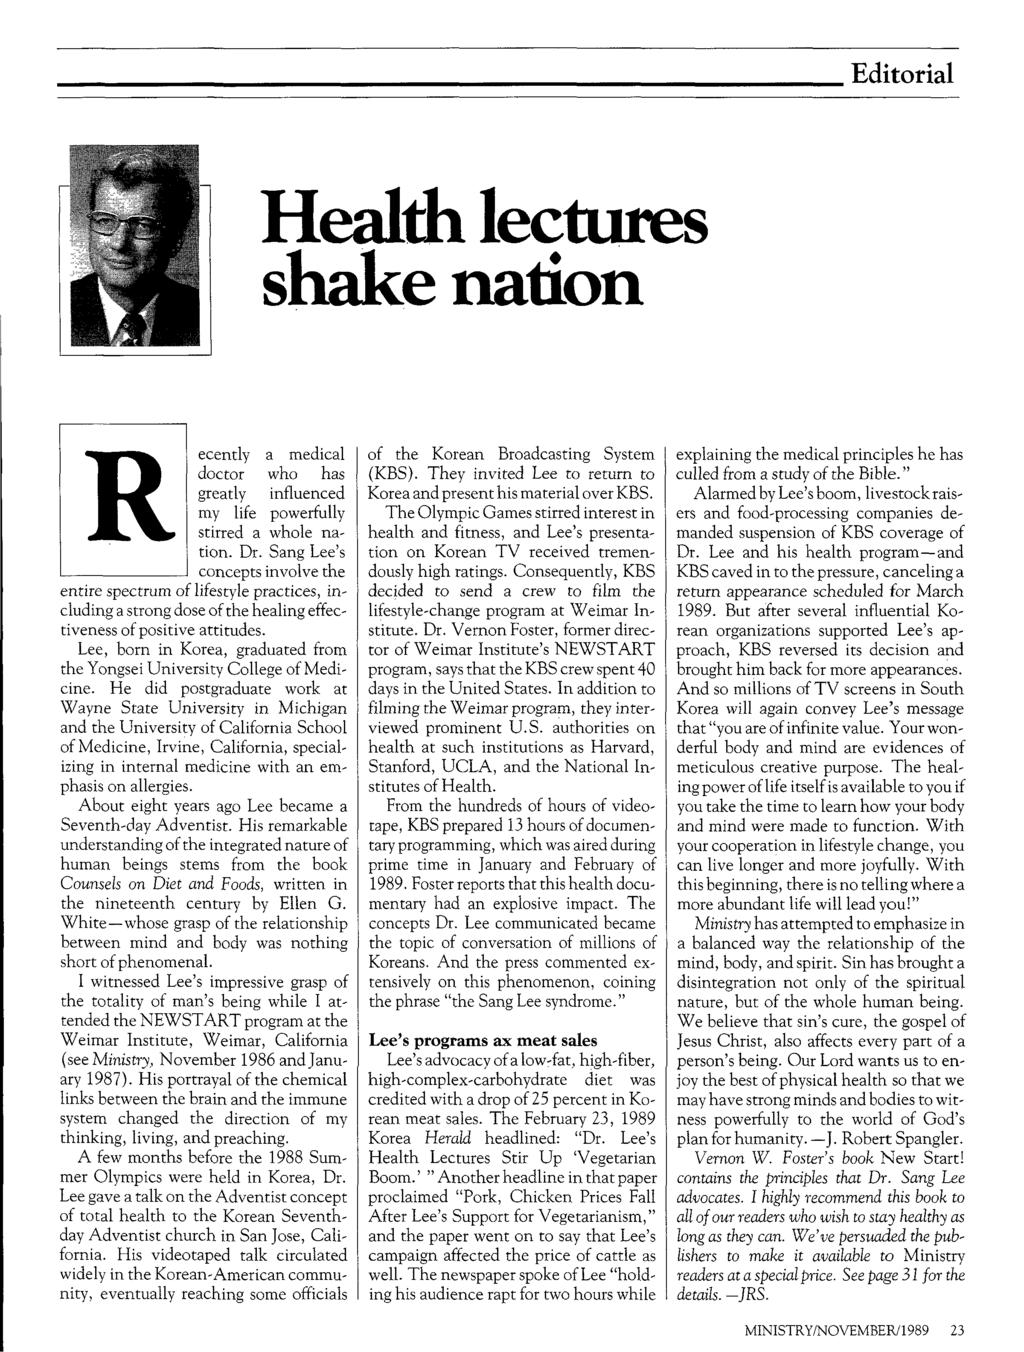 Editorial Health lectures shake nation ecently a medical doctor who has greatly influenced my life powerfully stirred a whole na tion. Dr.